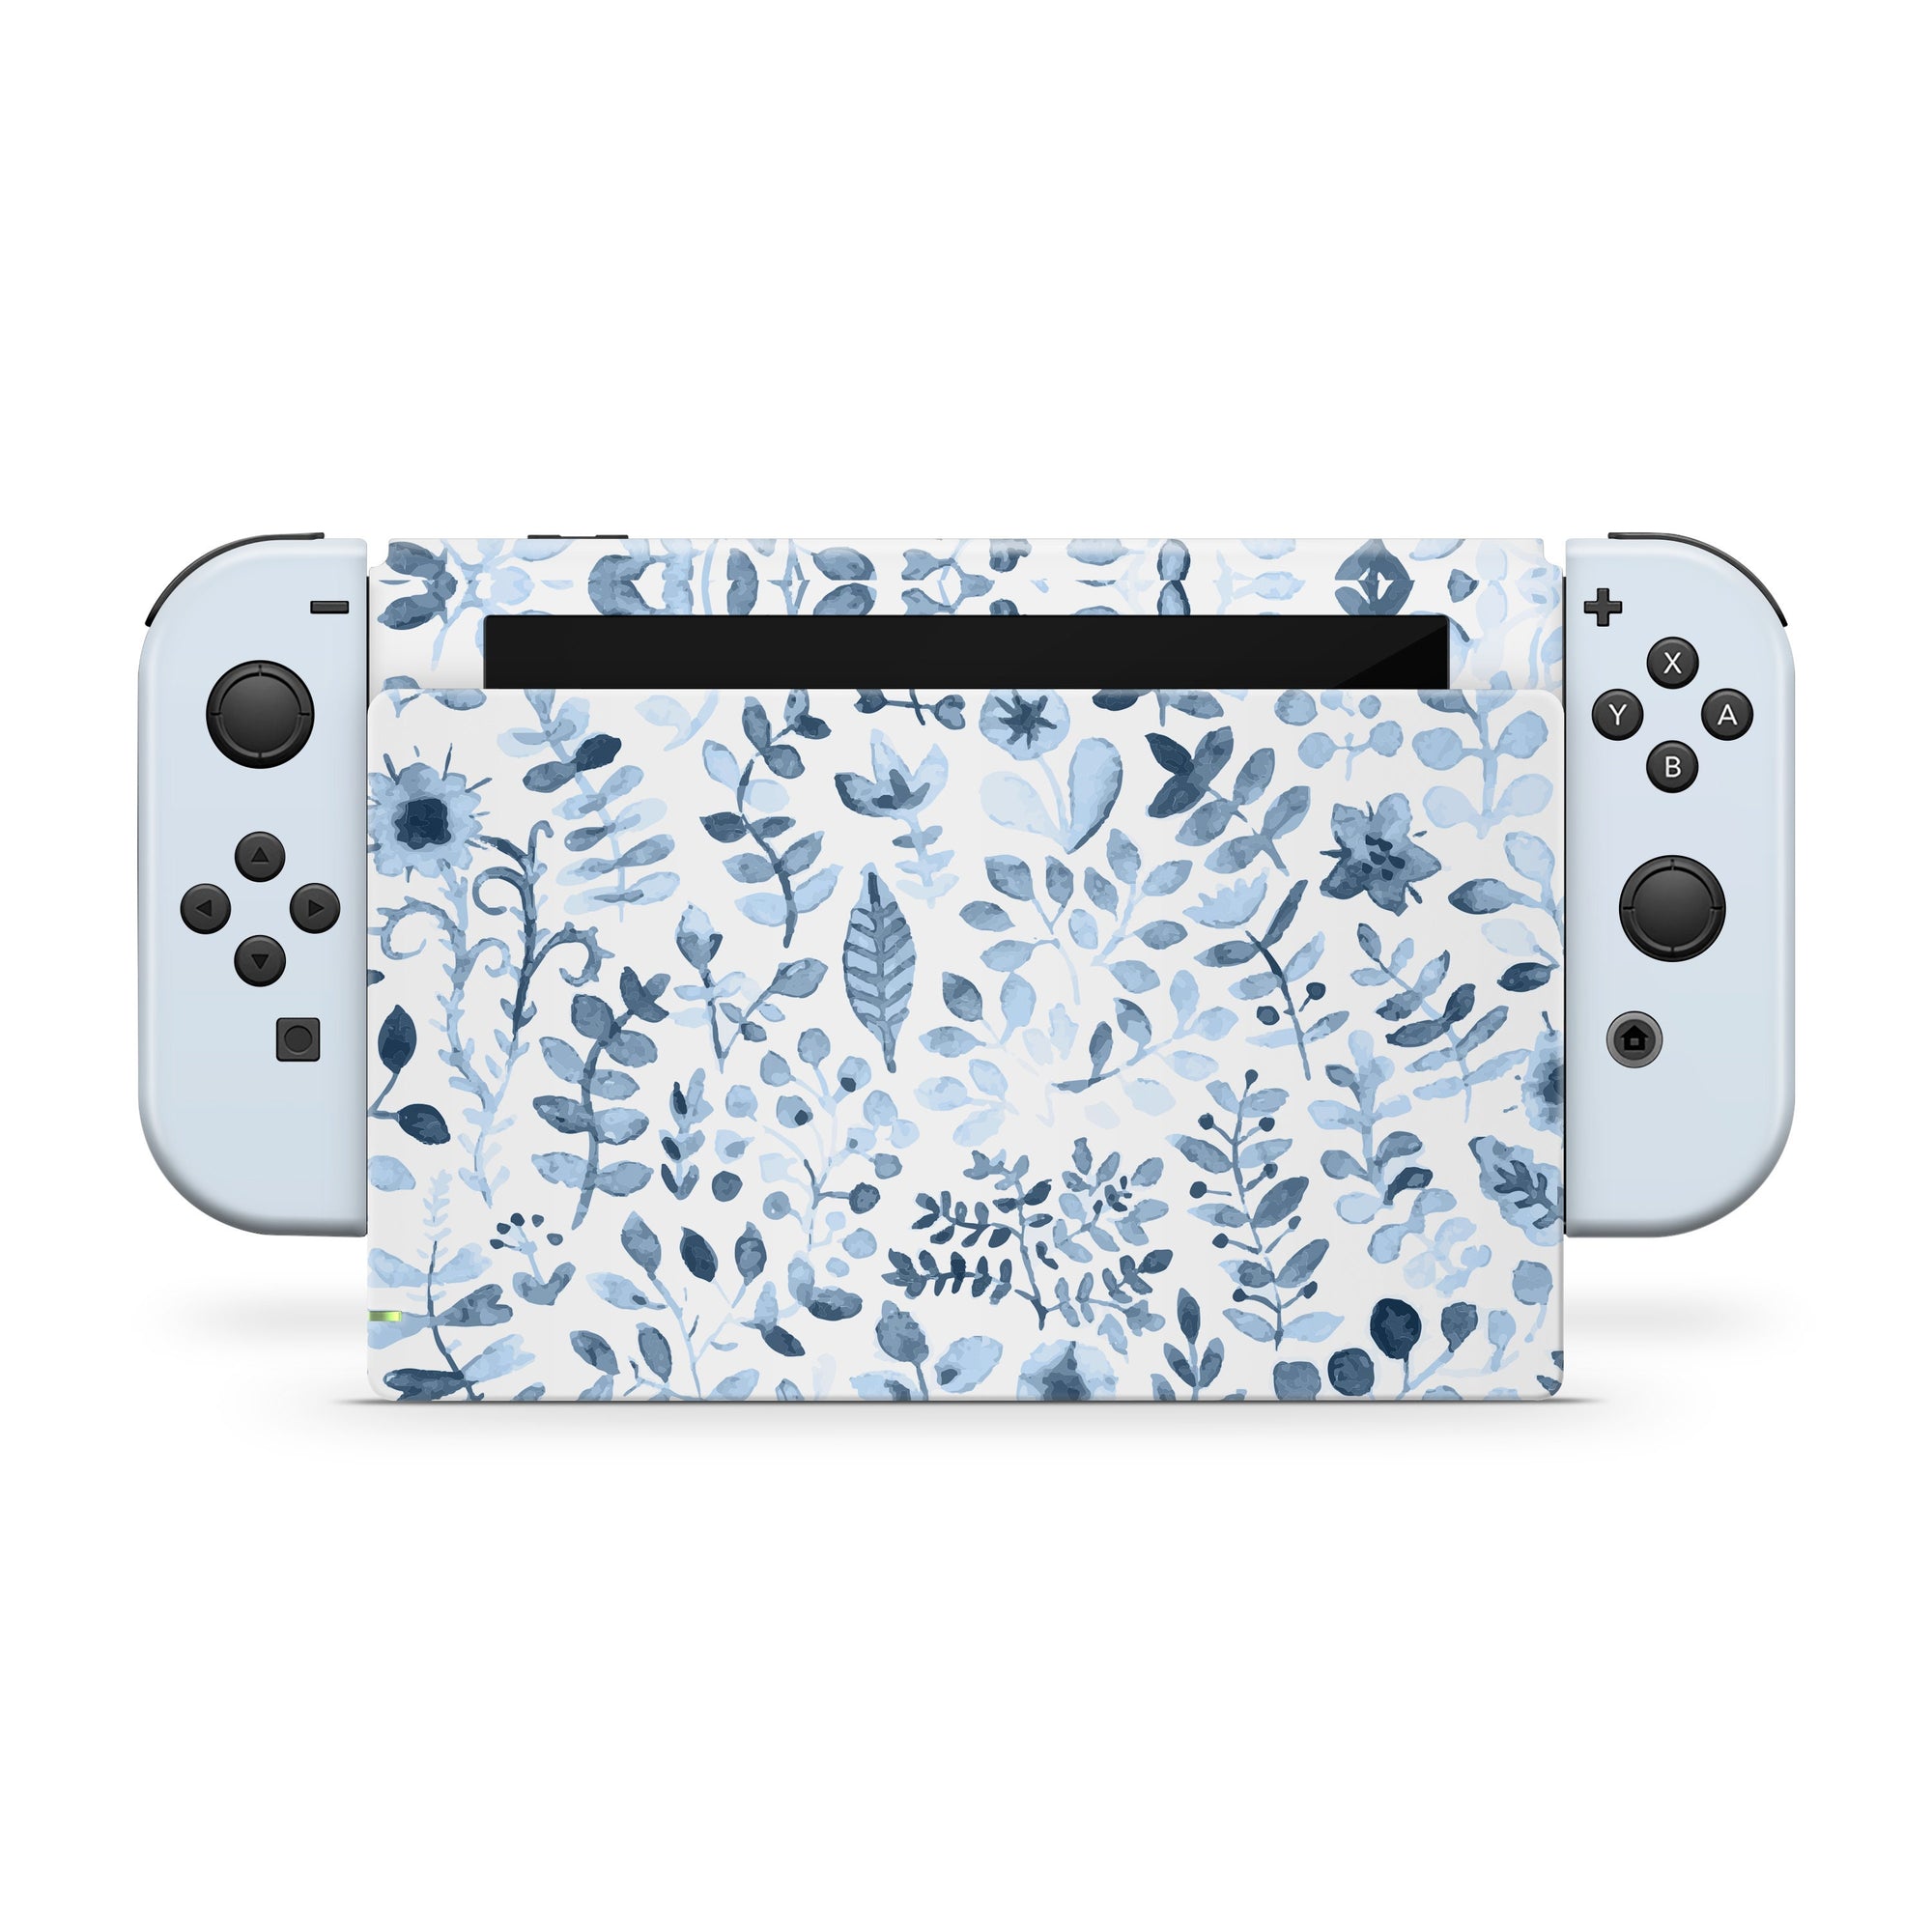 Nintendo switches skin Flowers, Blue switch skin Full cover decal vinyl 3m stickers